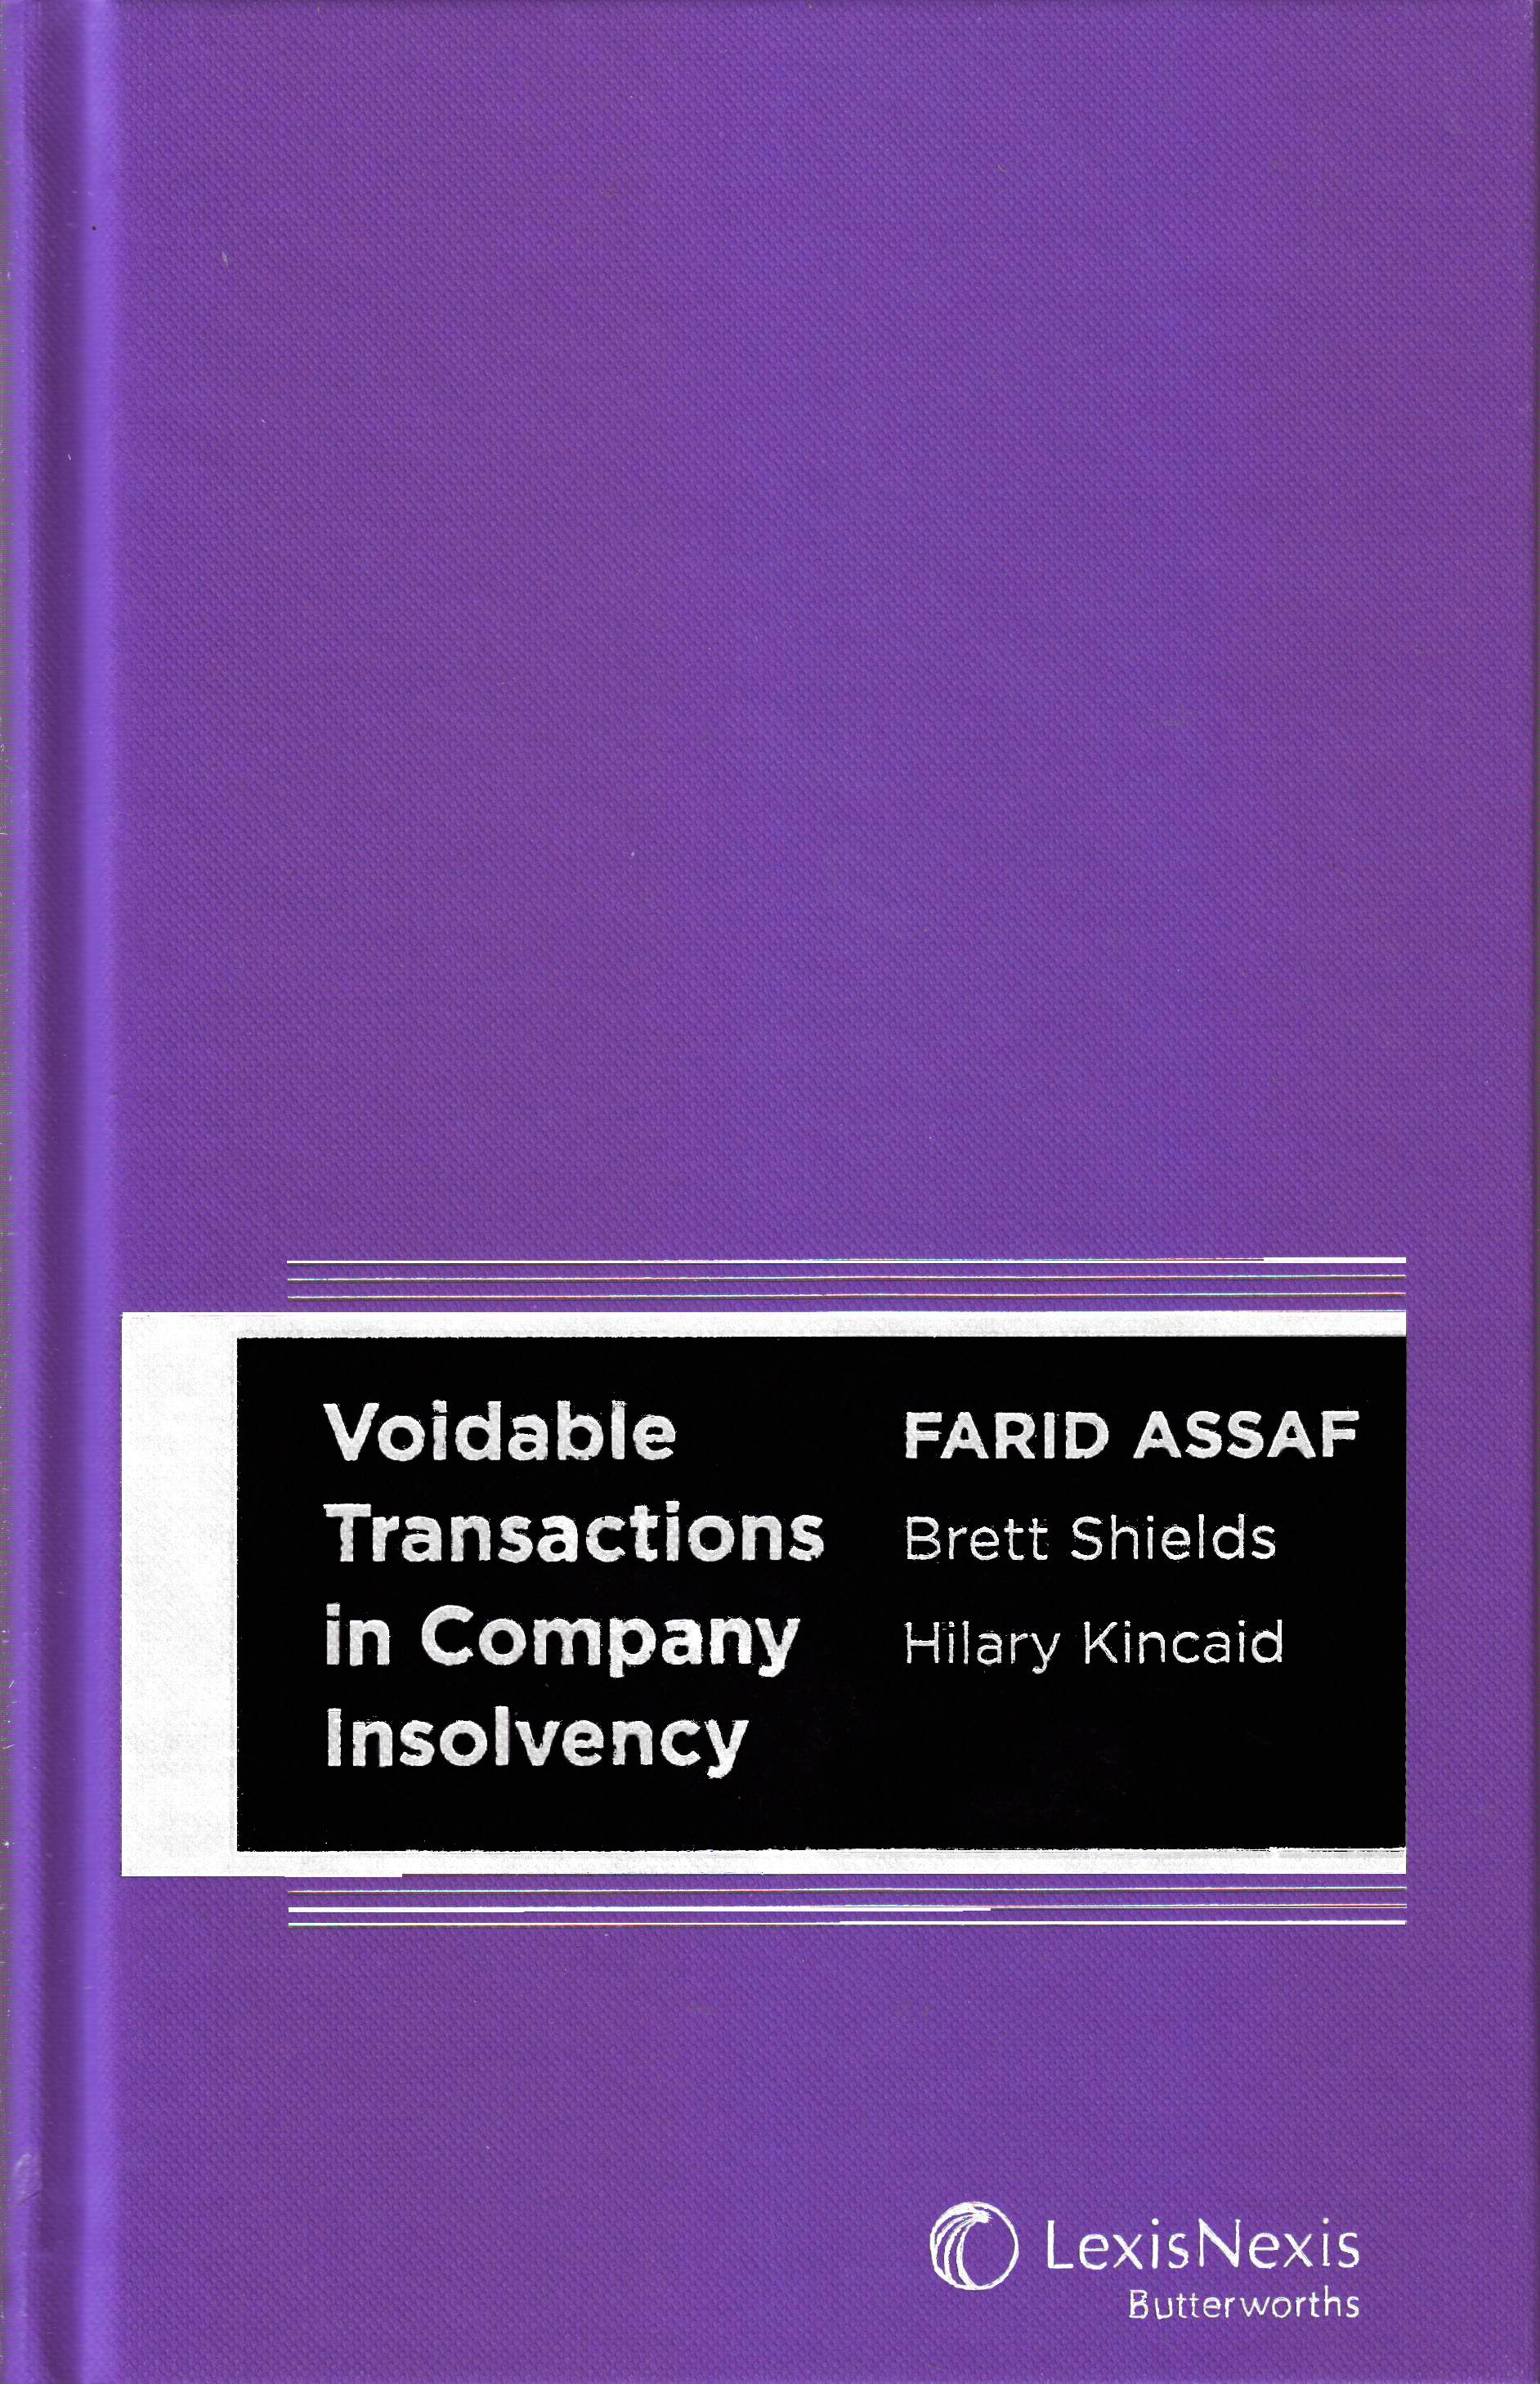 Voidable Transactions in Company Insolvency